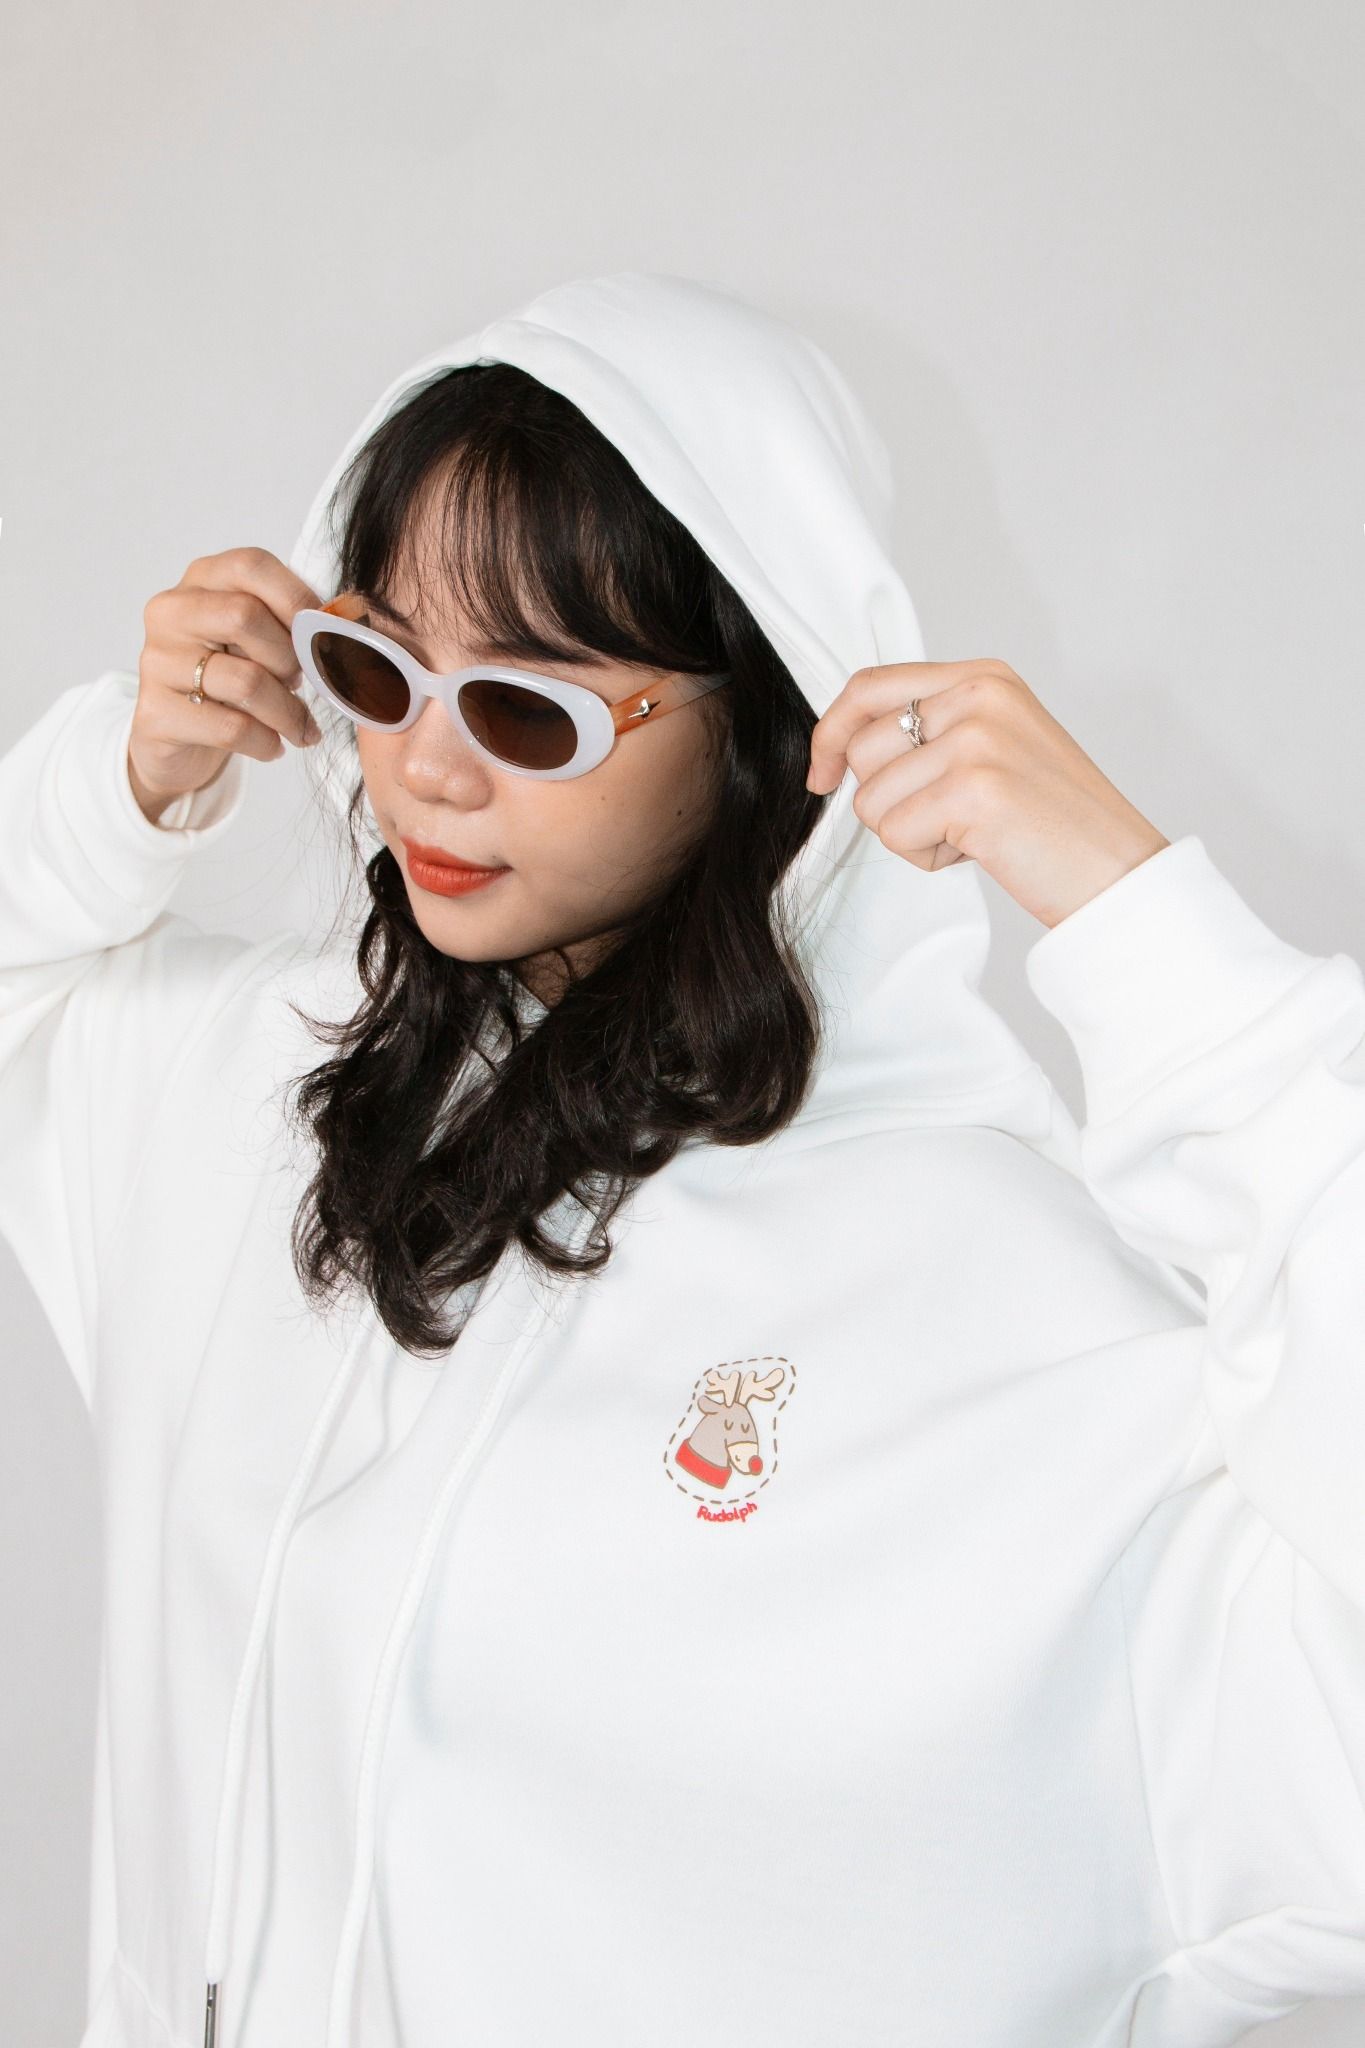  A24720 - A hoodies 2809 in tuần lộc lưng in The red 